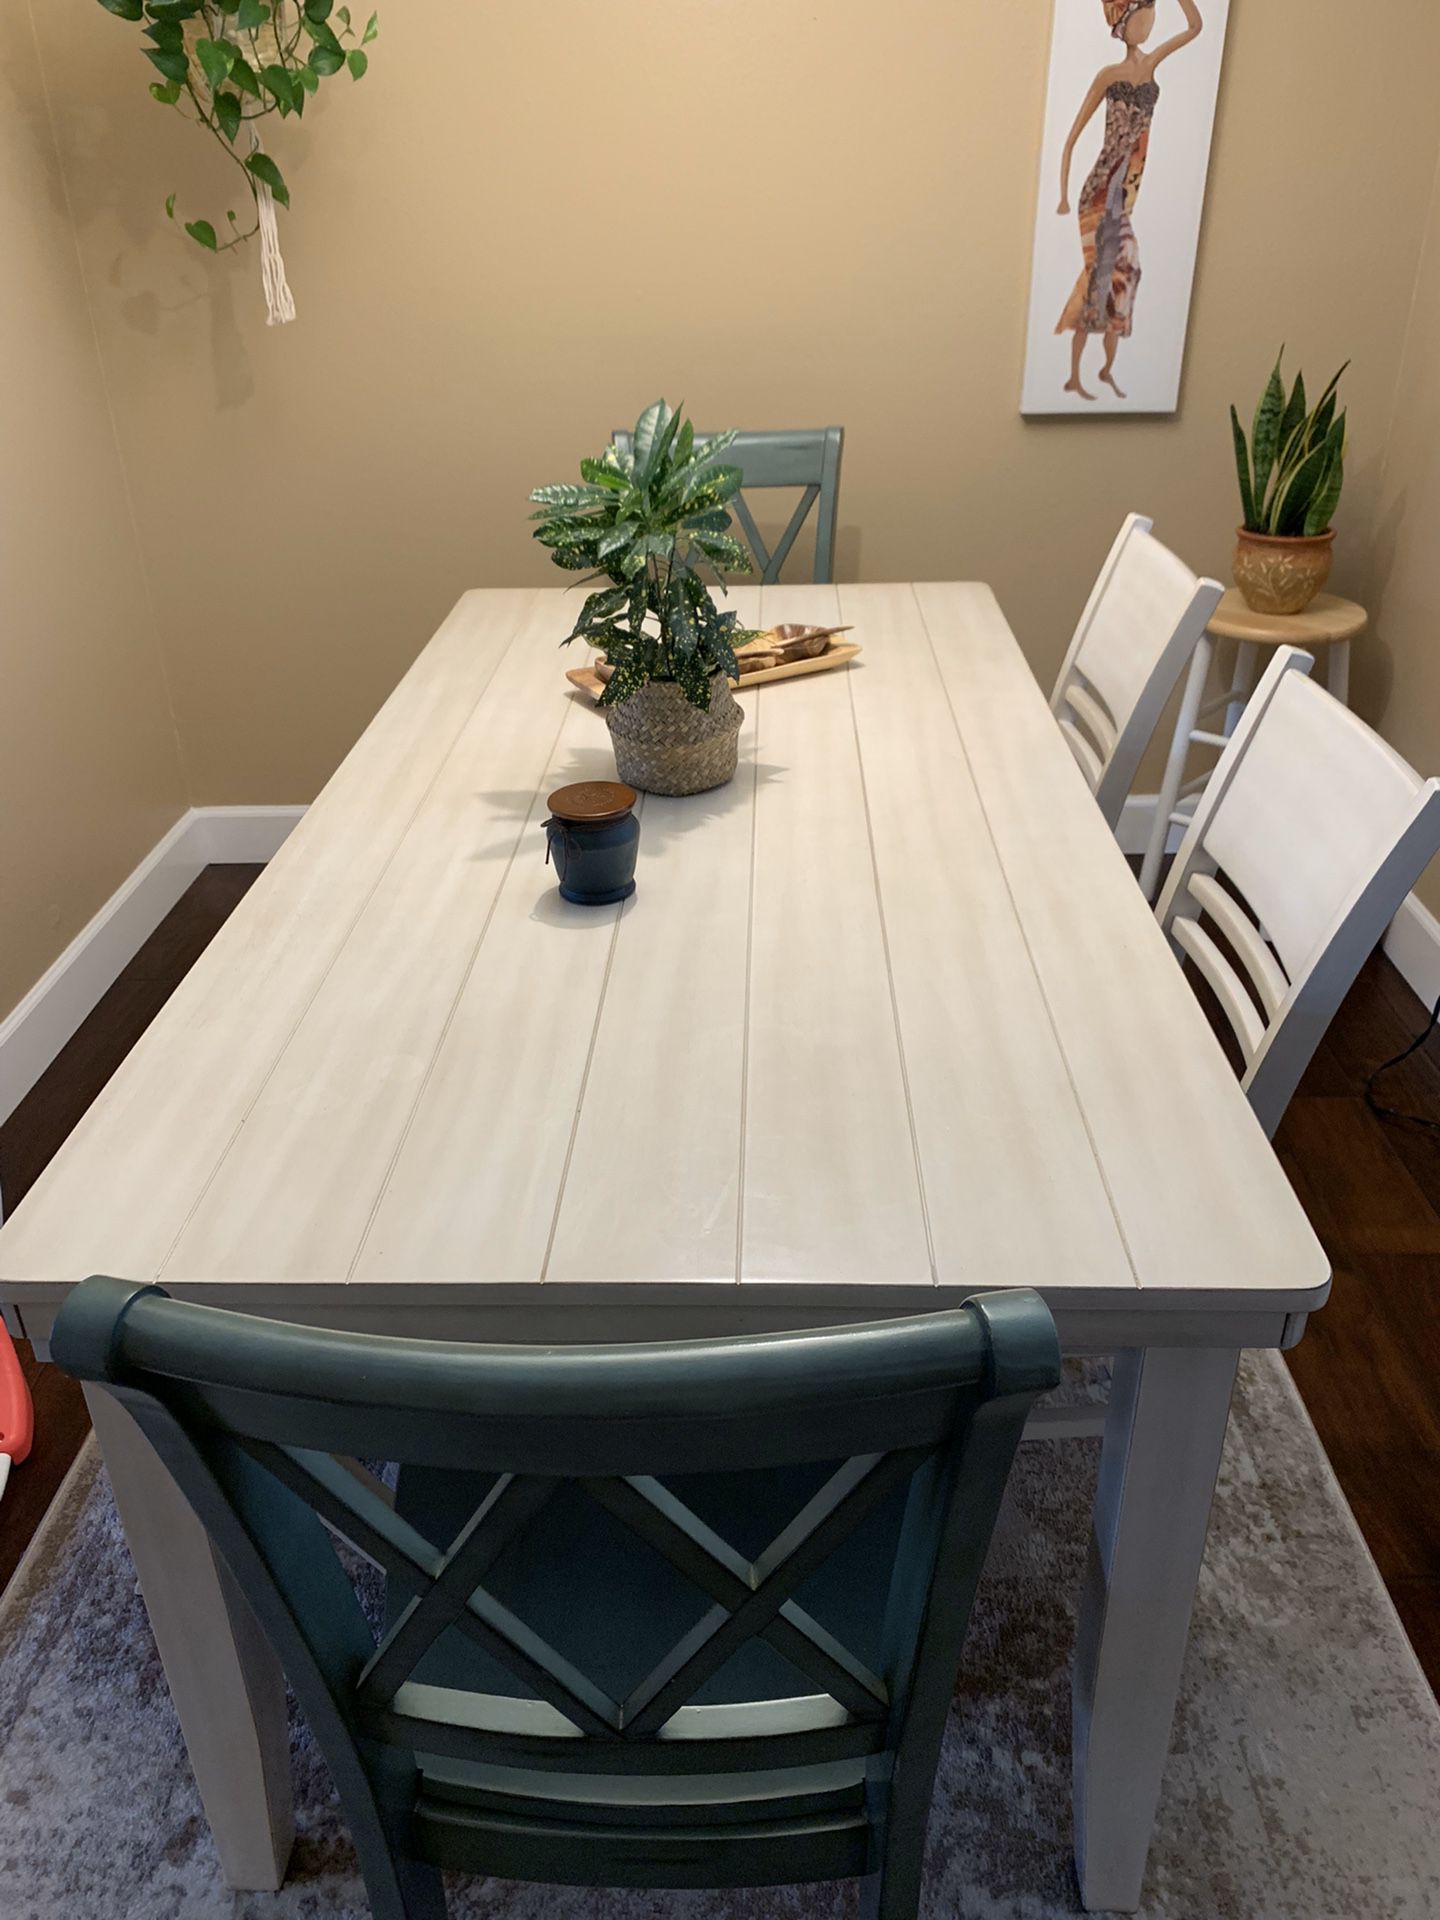 6 piece wooden dining table